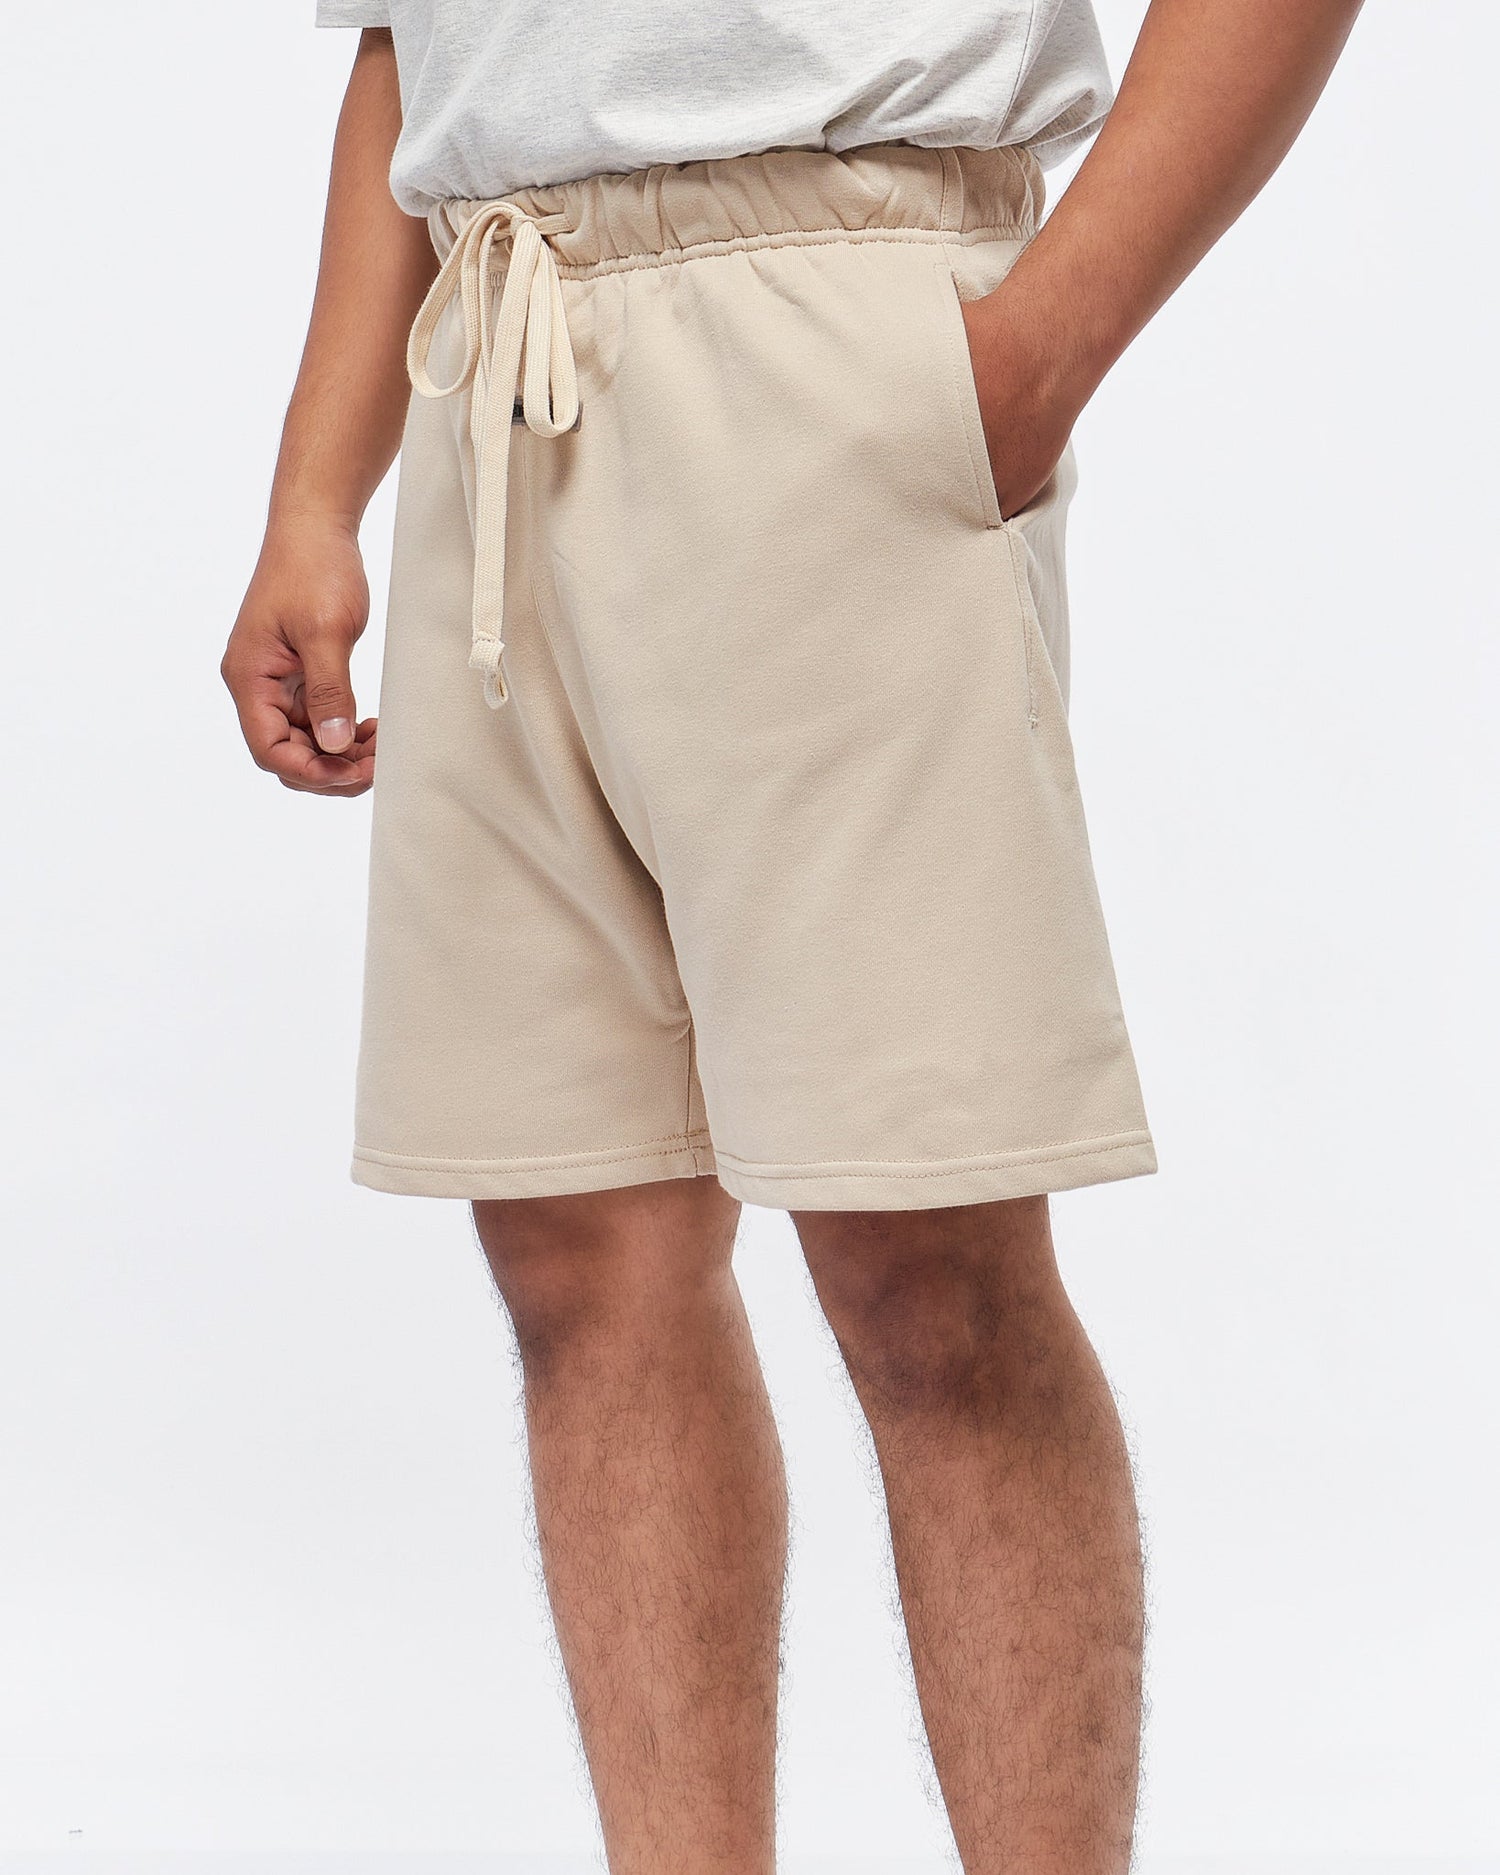 MOI OUTFIT-Essentials Logo Printed Men Shorts 19.90